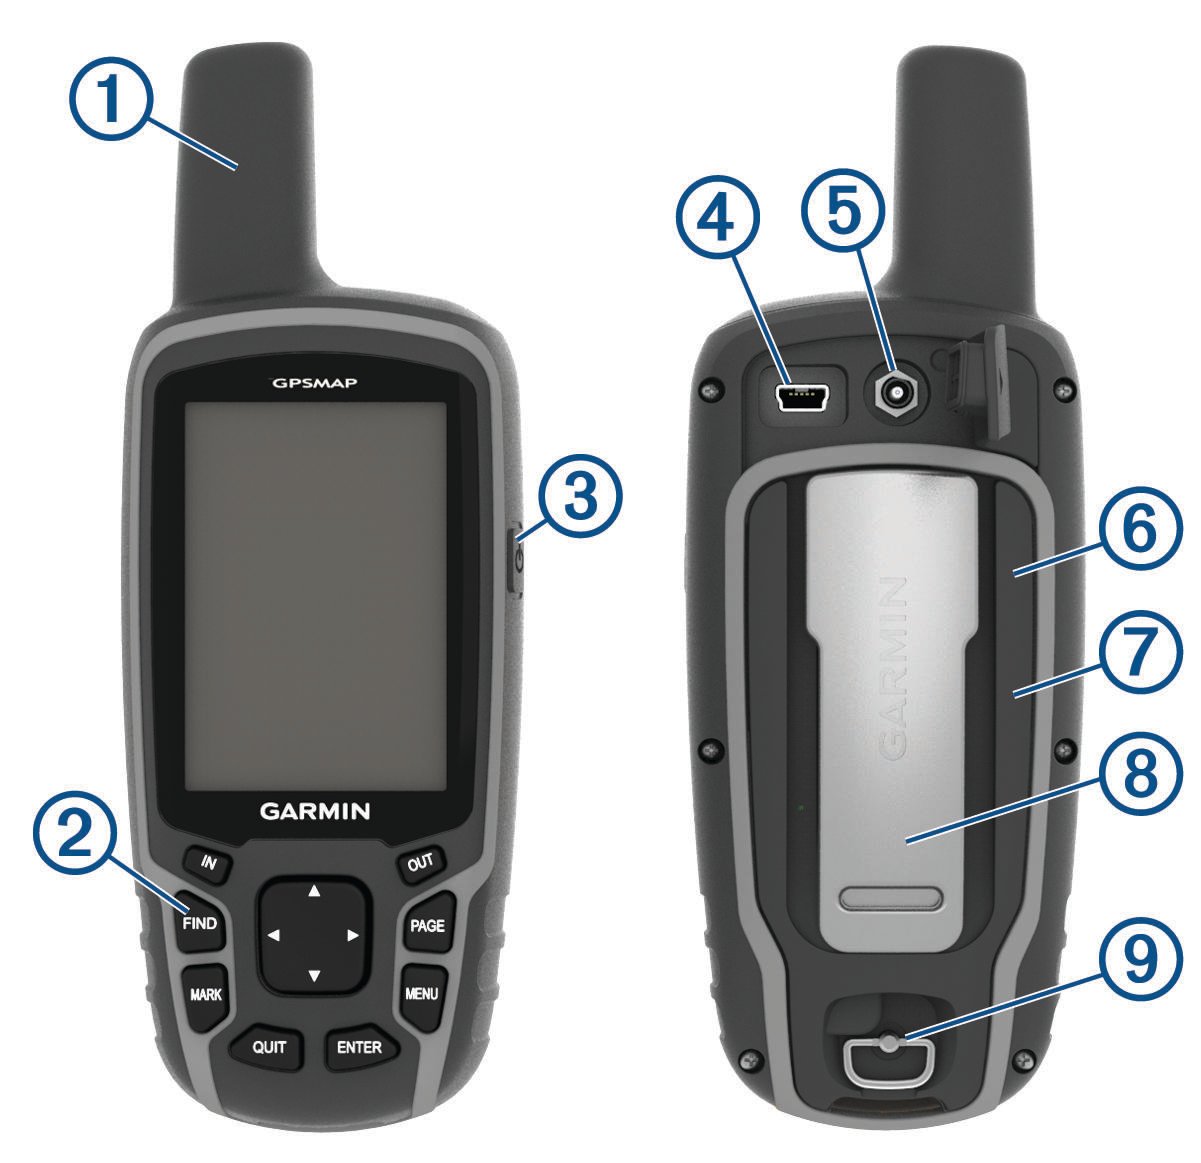 GPSMAP 64 series / GPSMAP 64x series - GPSMAP Device Overview (No